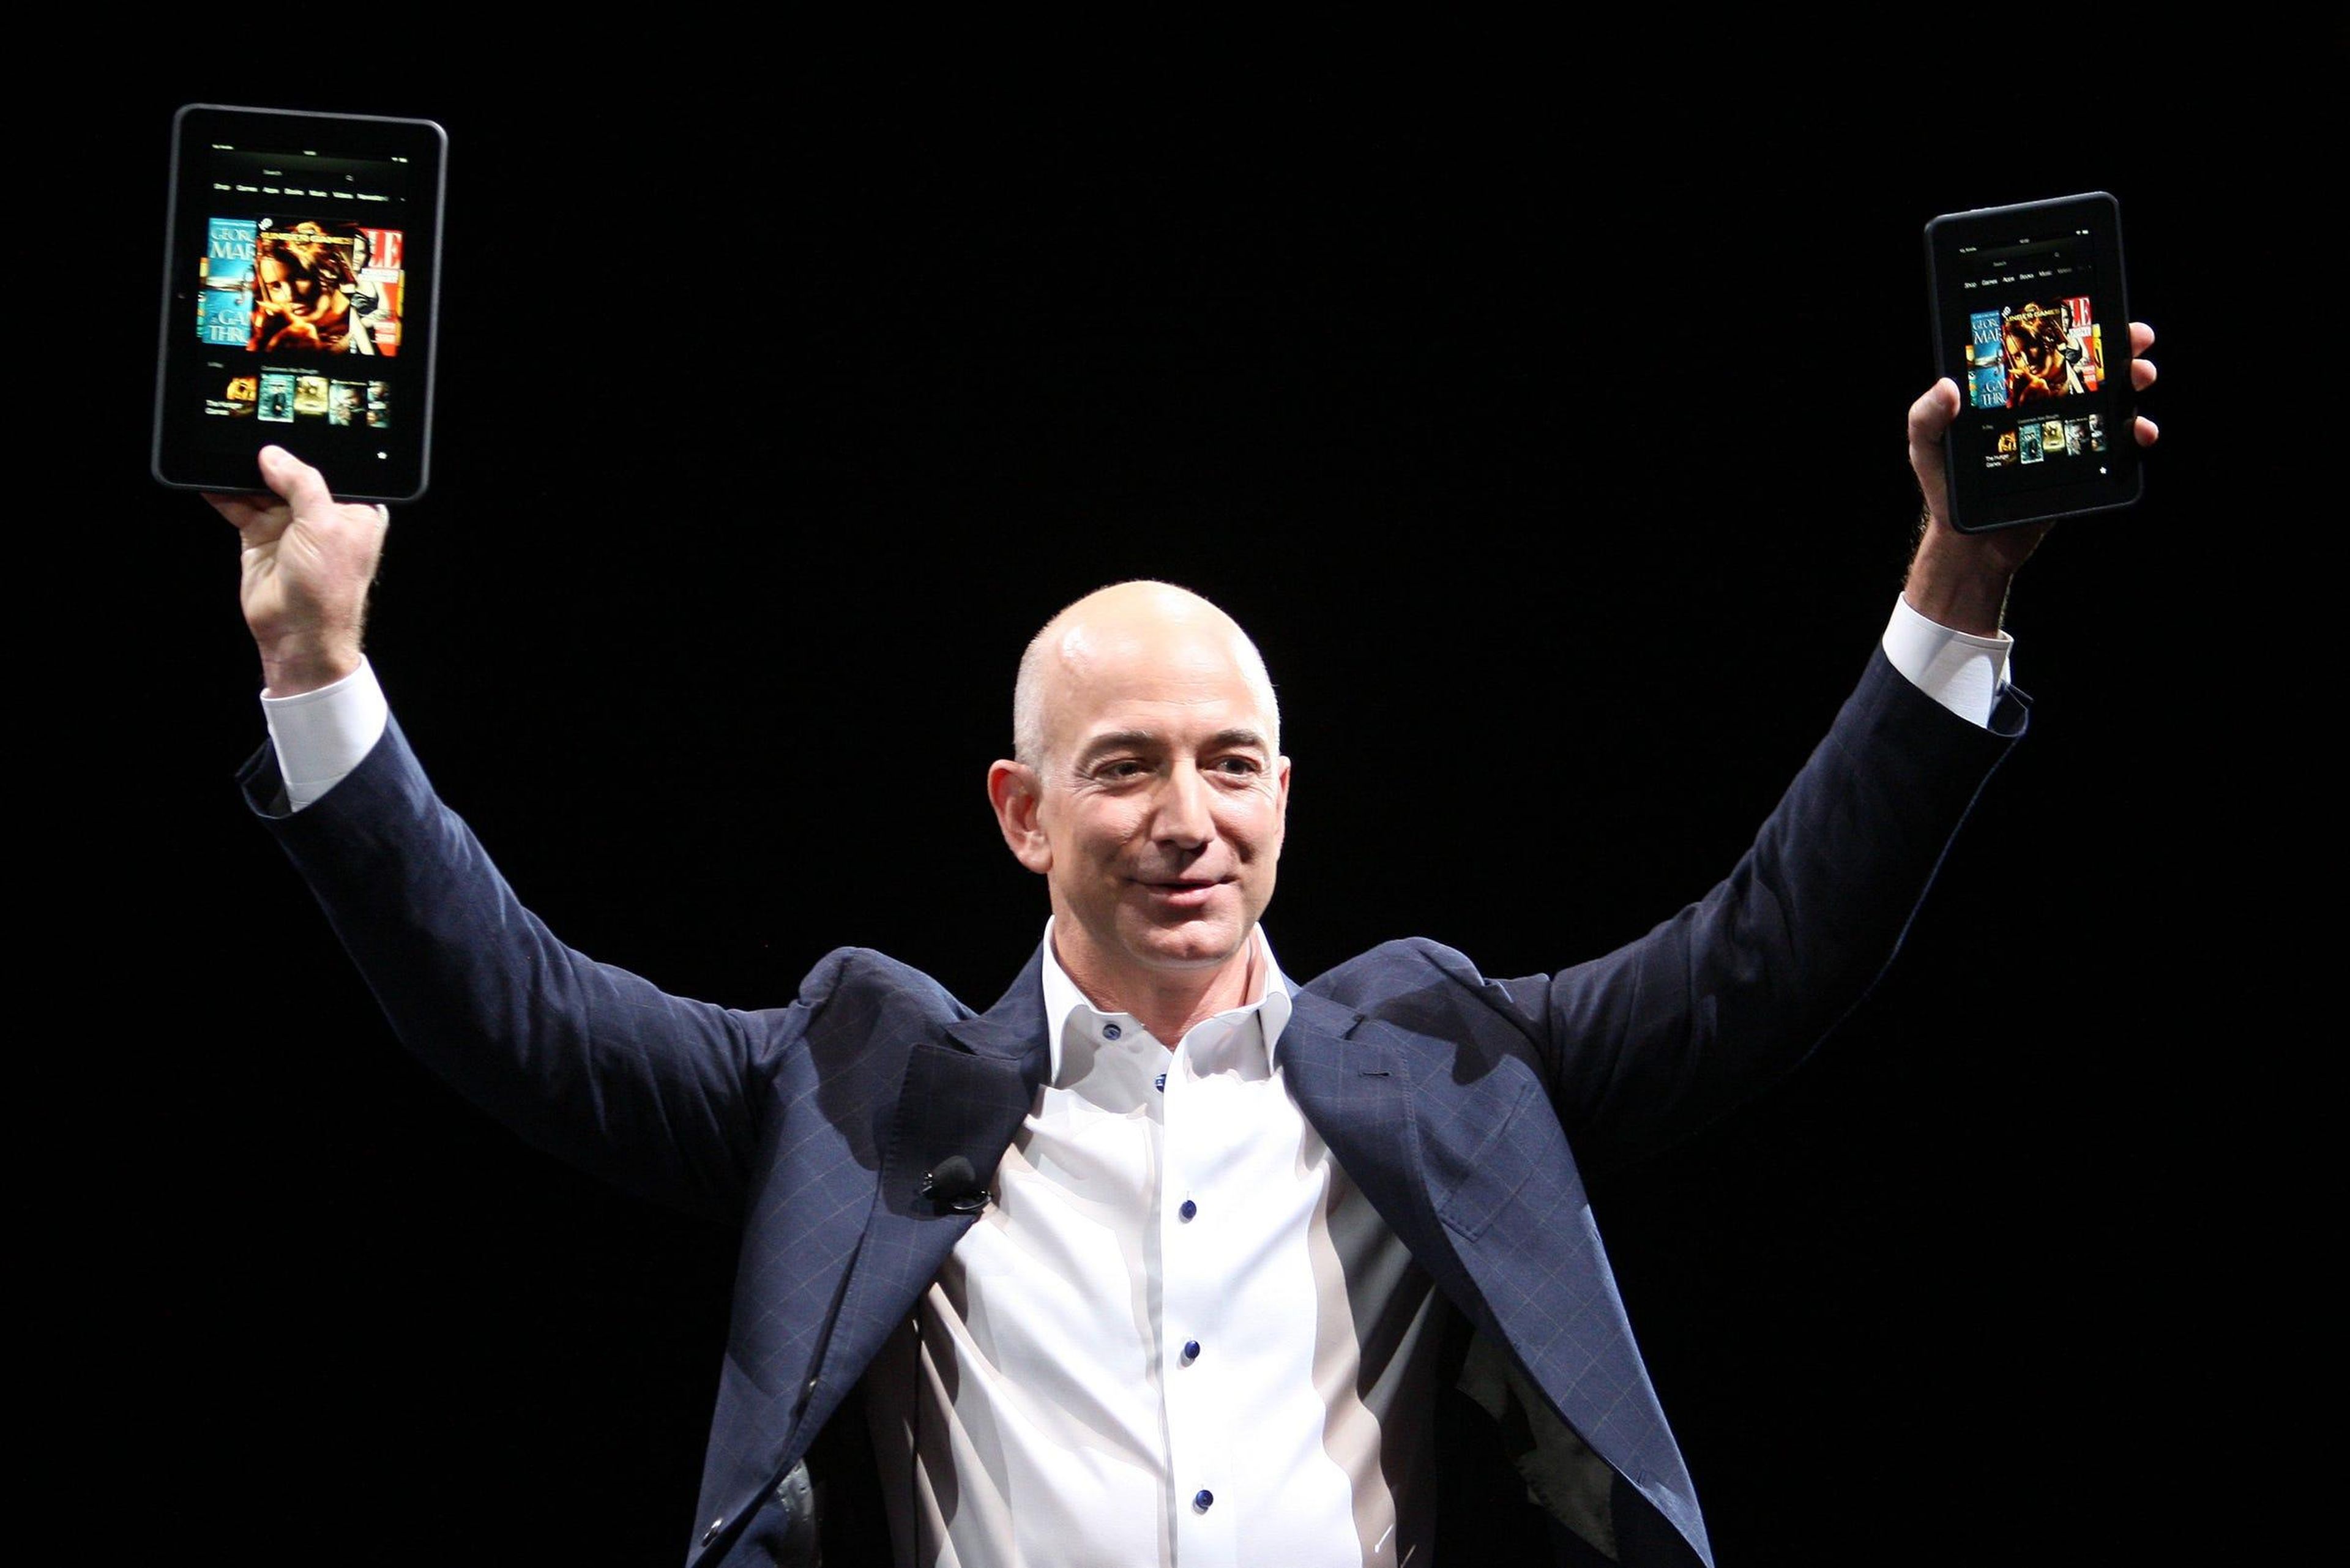 Amazon CEO Jeff Bezos holds two Kindle Fire HD devices during a press conference on September 6, 2012 in Santa Monica, California.